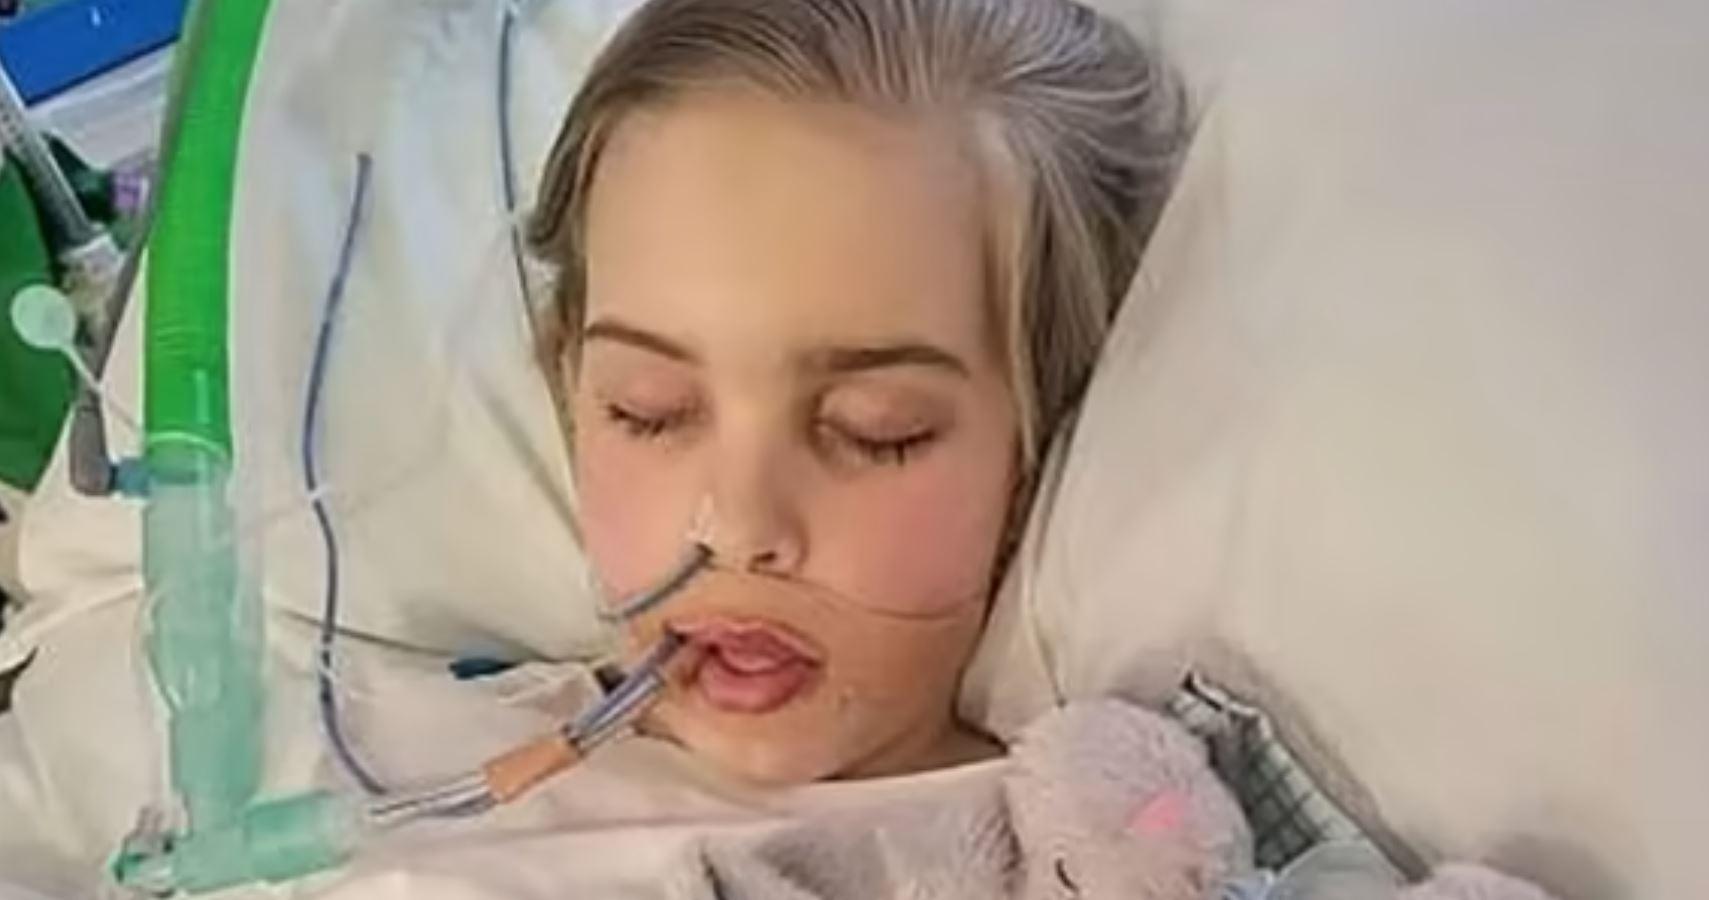 Family vows to appeal after UK court orders life support removed from 12-year-old